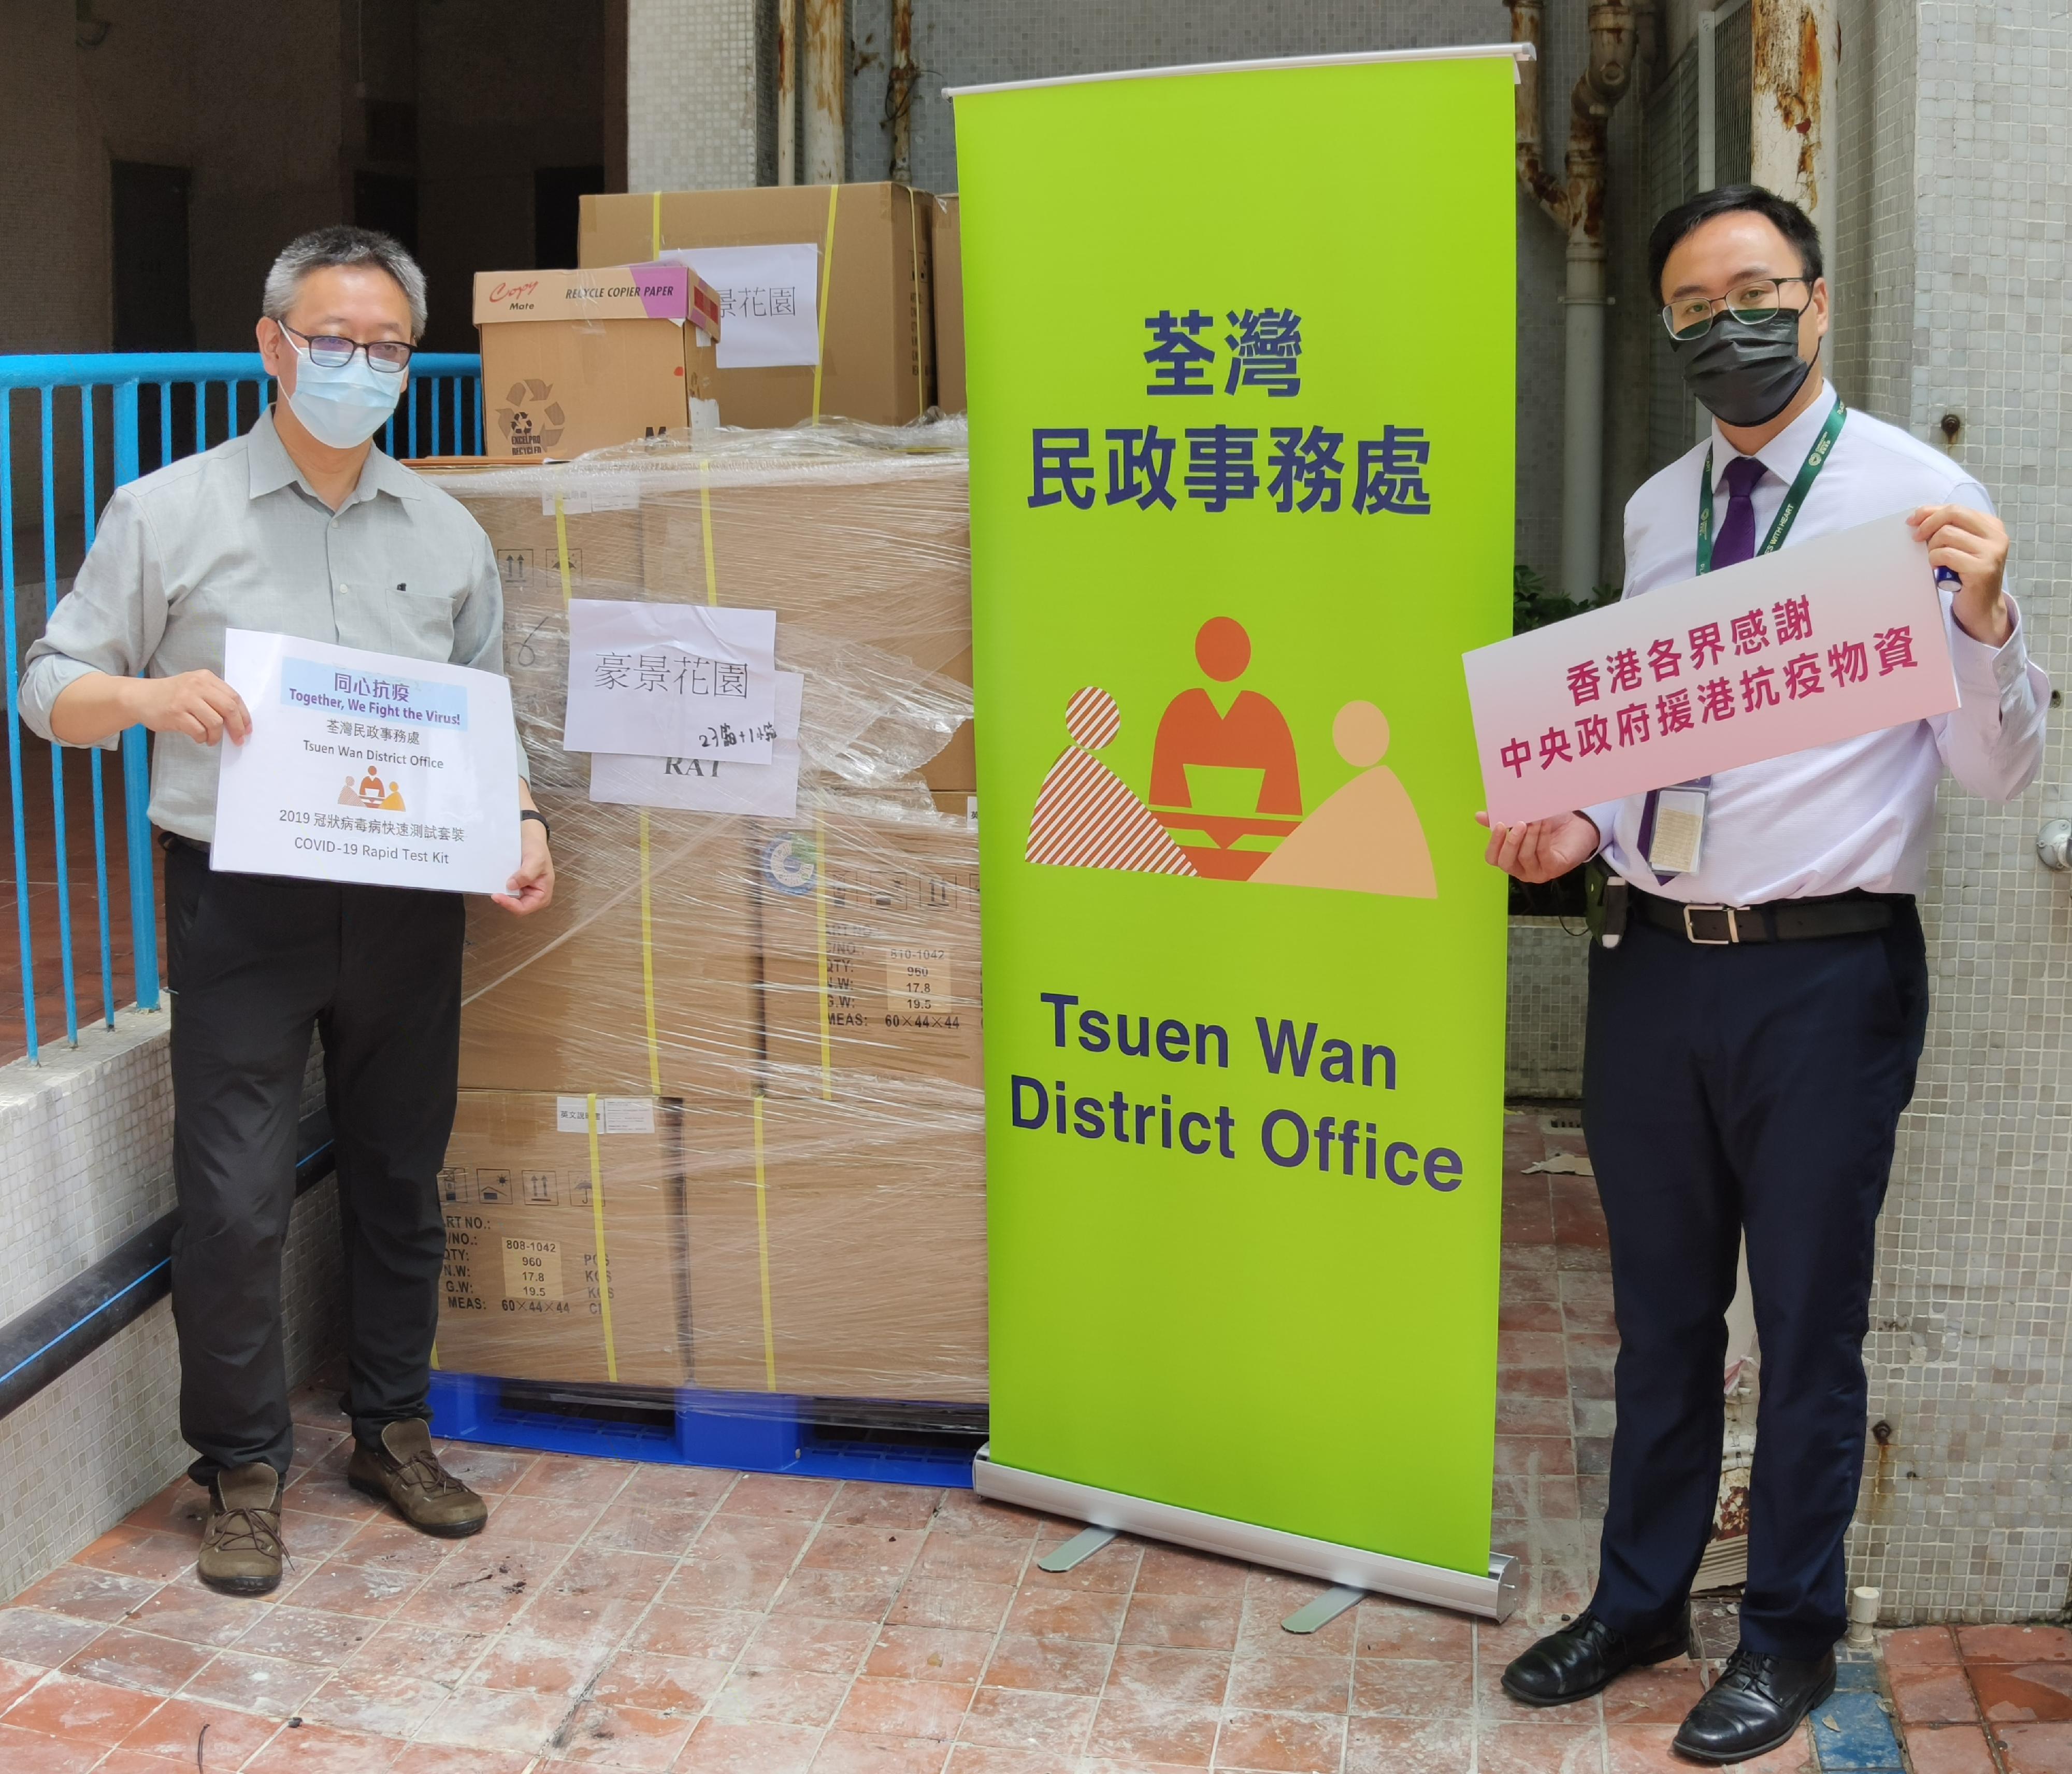 The Tsuen Wan District Office today (June 6) distributed COVID-19 rapid test kits to households, cleansing workers and property management staff living and working in Hong Kong Garden for voluntary testing through the property management company.